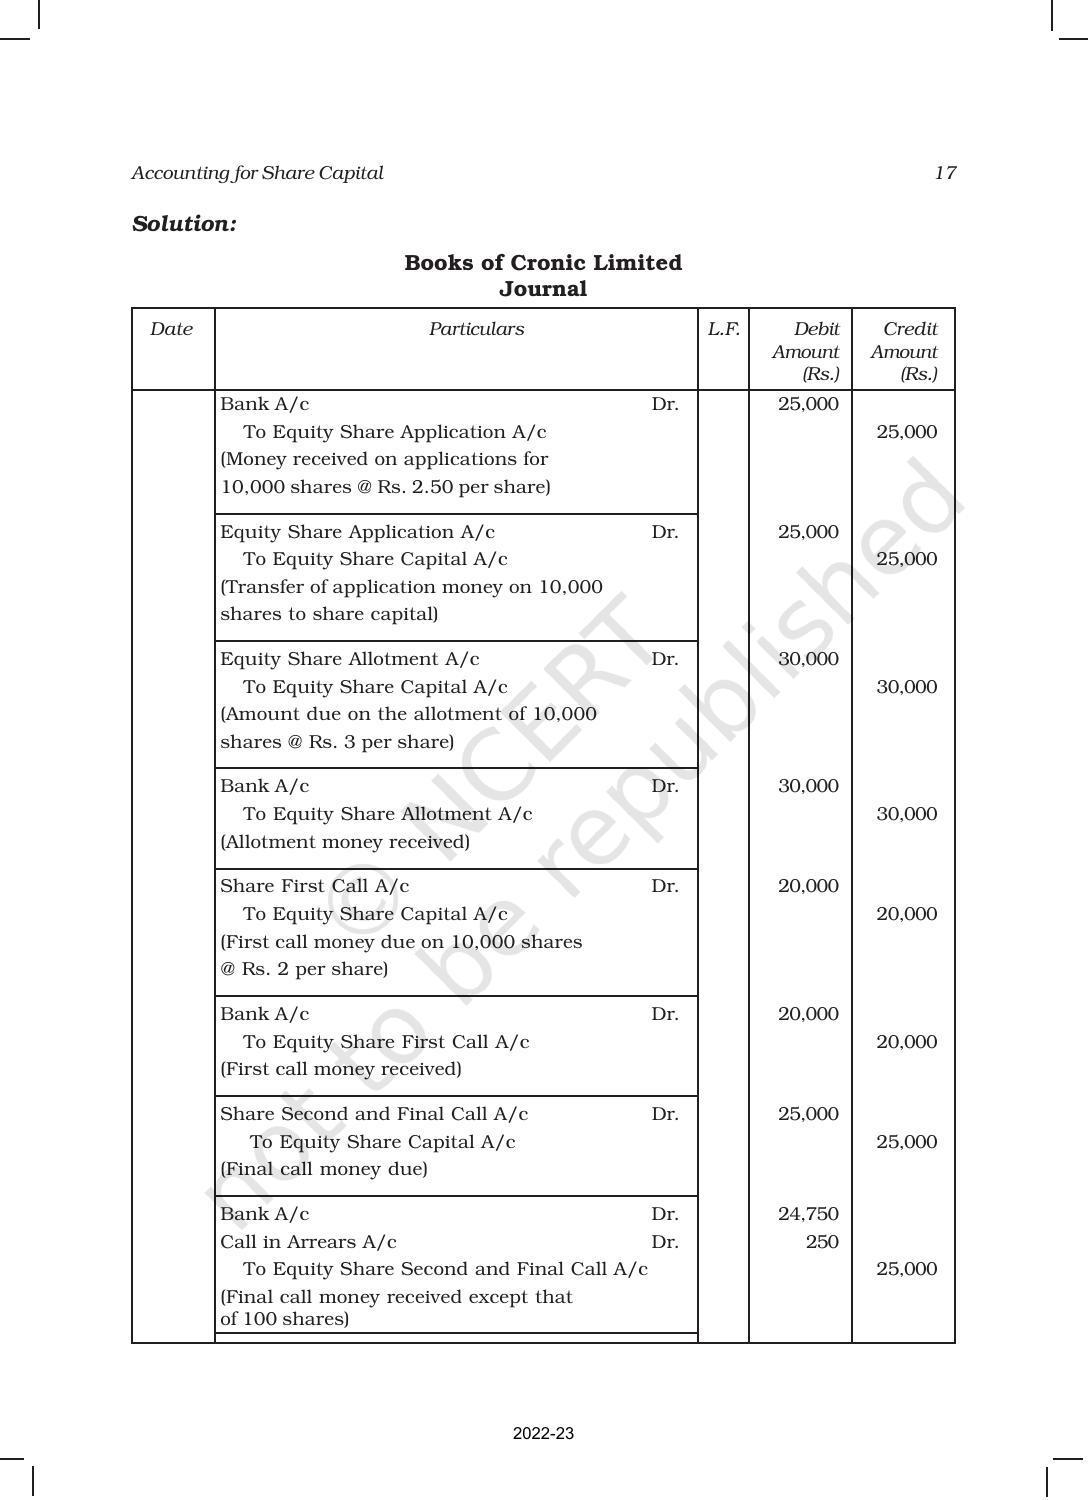 NCERT Book for Class 12 Accountancy Part II Chapter 1 Accounting for Share Capital - Page 17